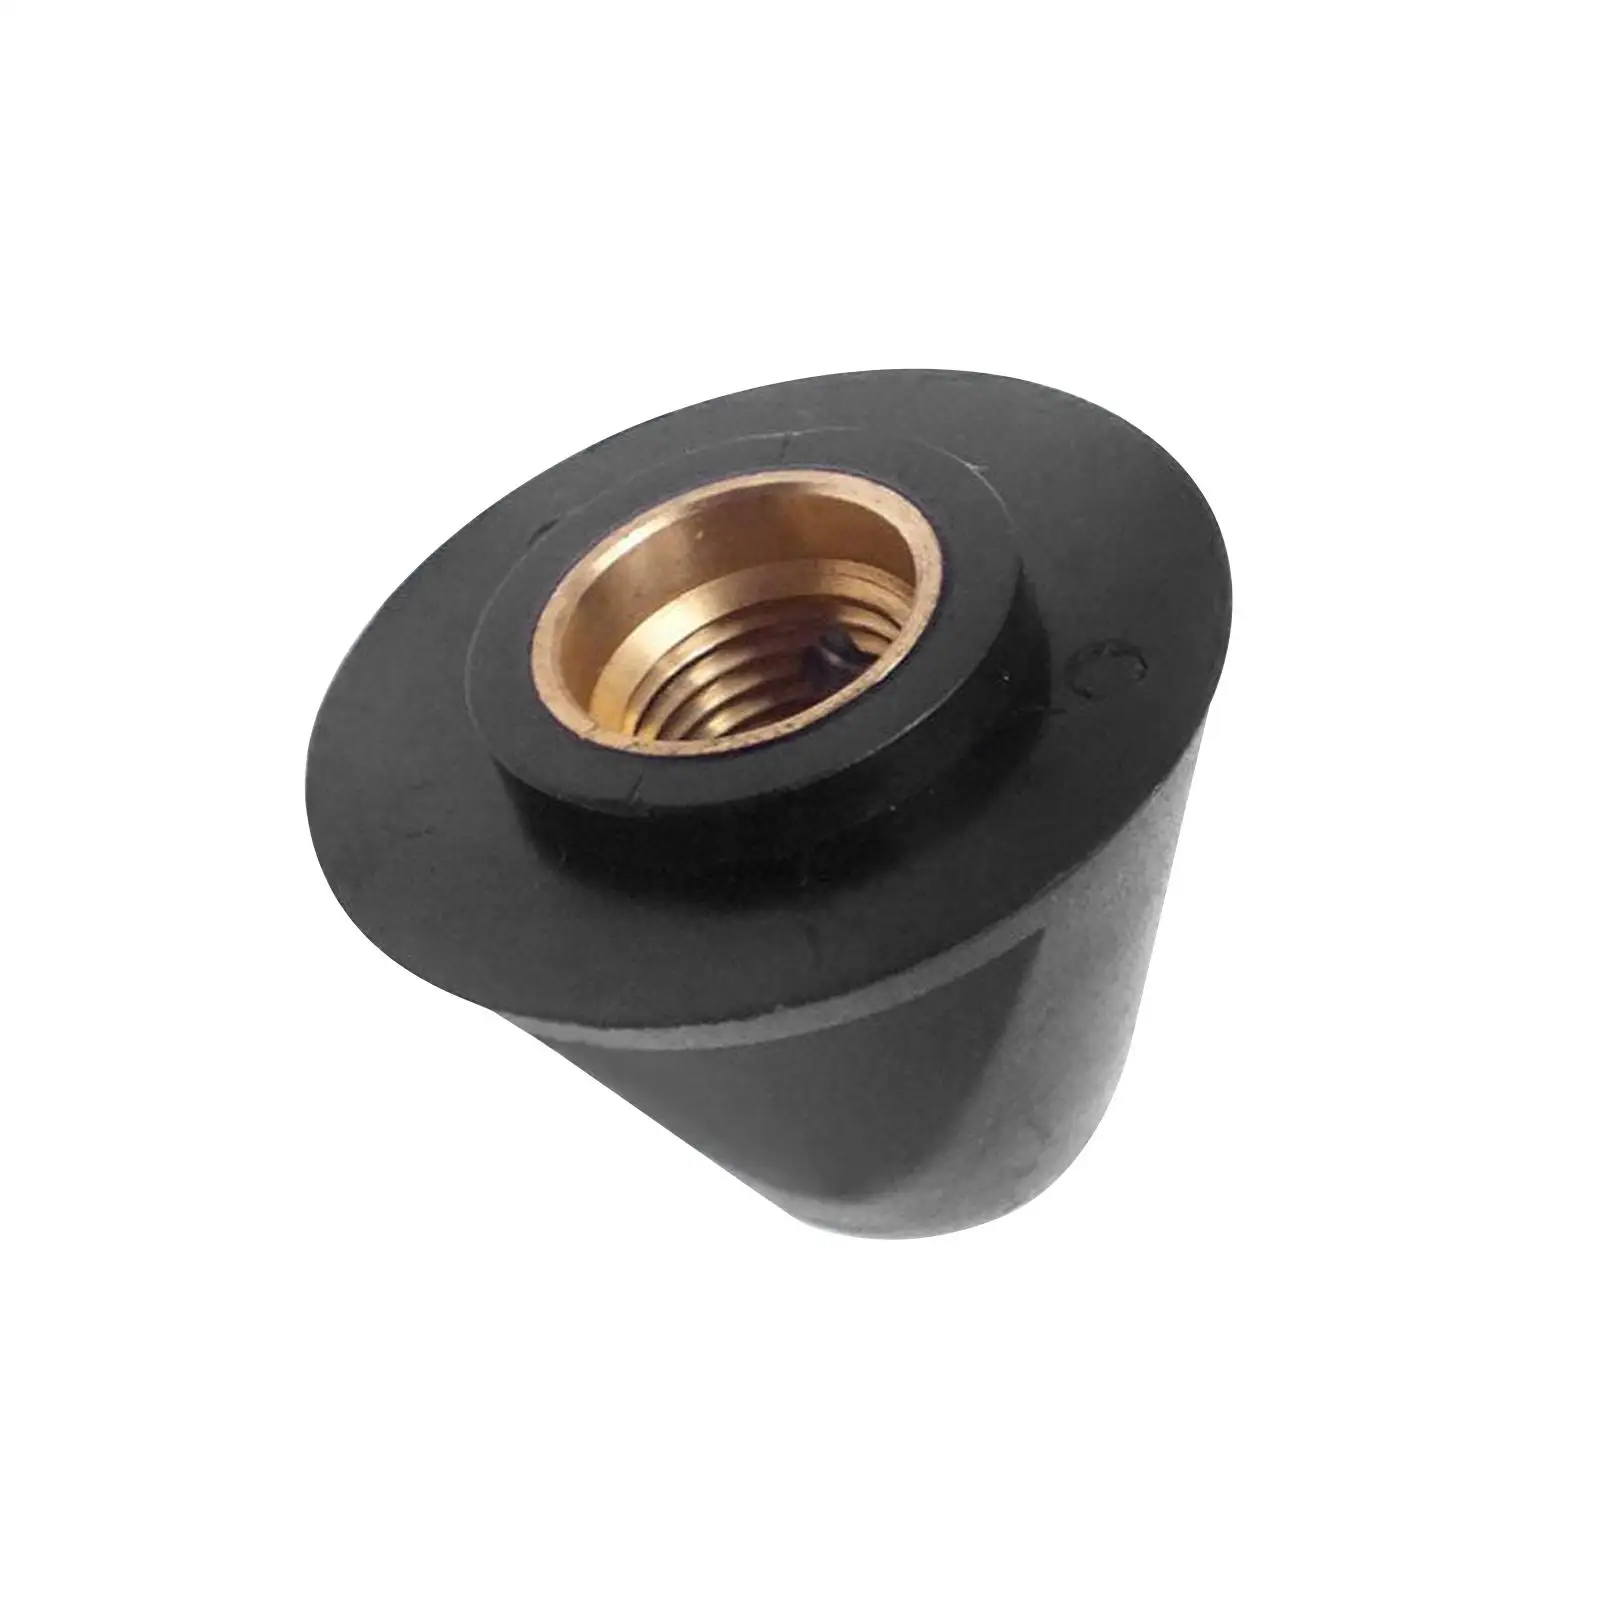 Propeller Prop Nut 647-45616-02 Replace Parts for Yamaha Outboard Engine 4HP 5HP High Performance Engine Parts